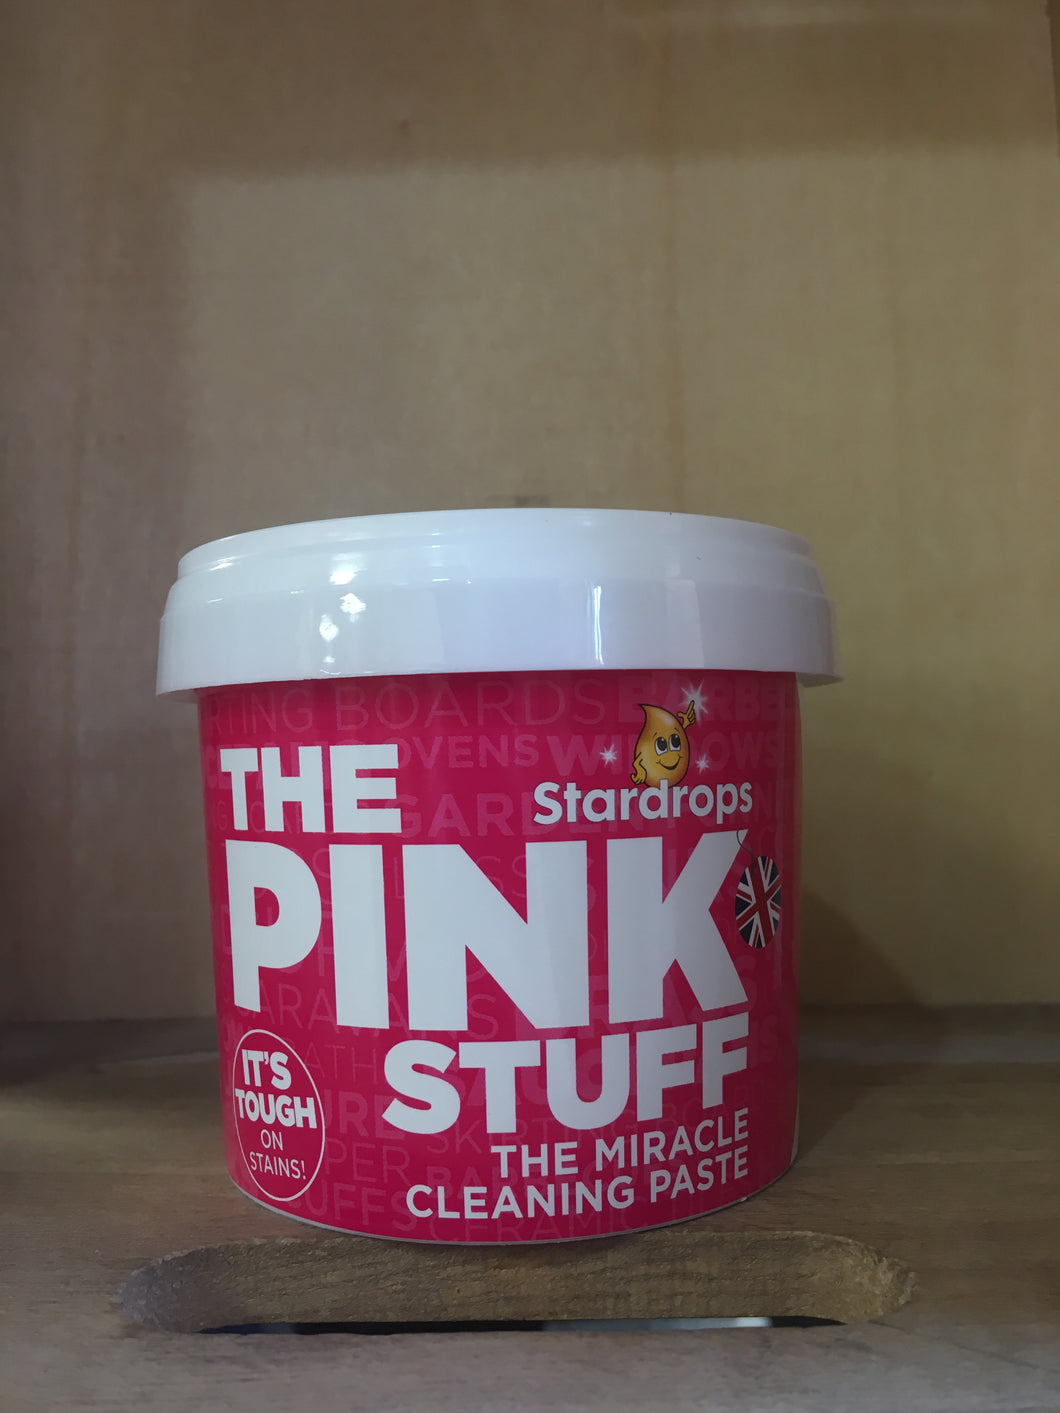 The Pink Stuff The Miracle Cleaning Paste - 500 g